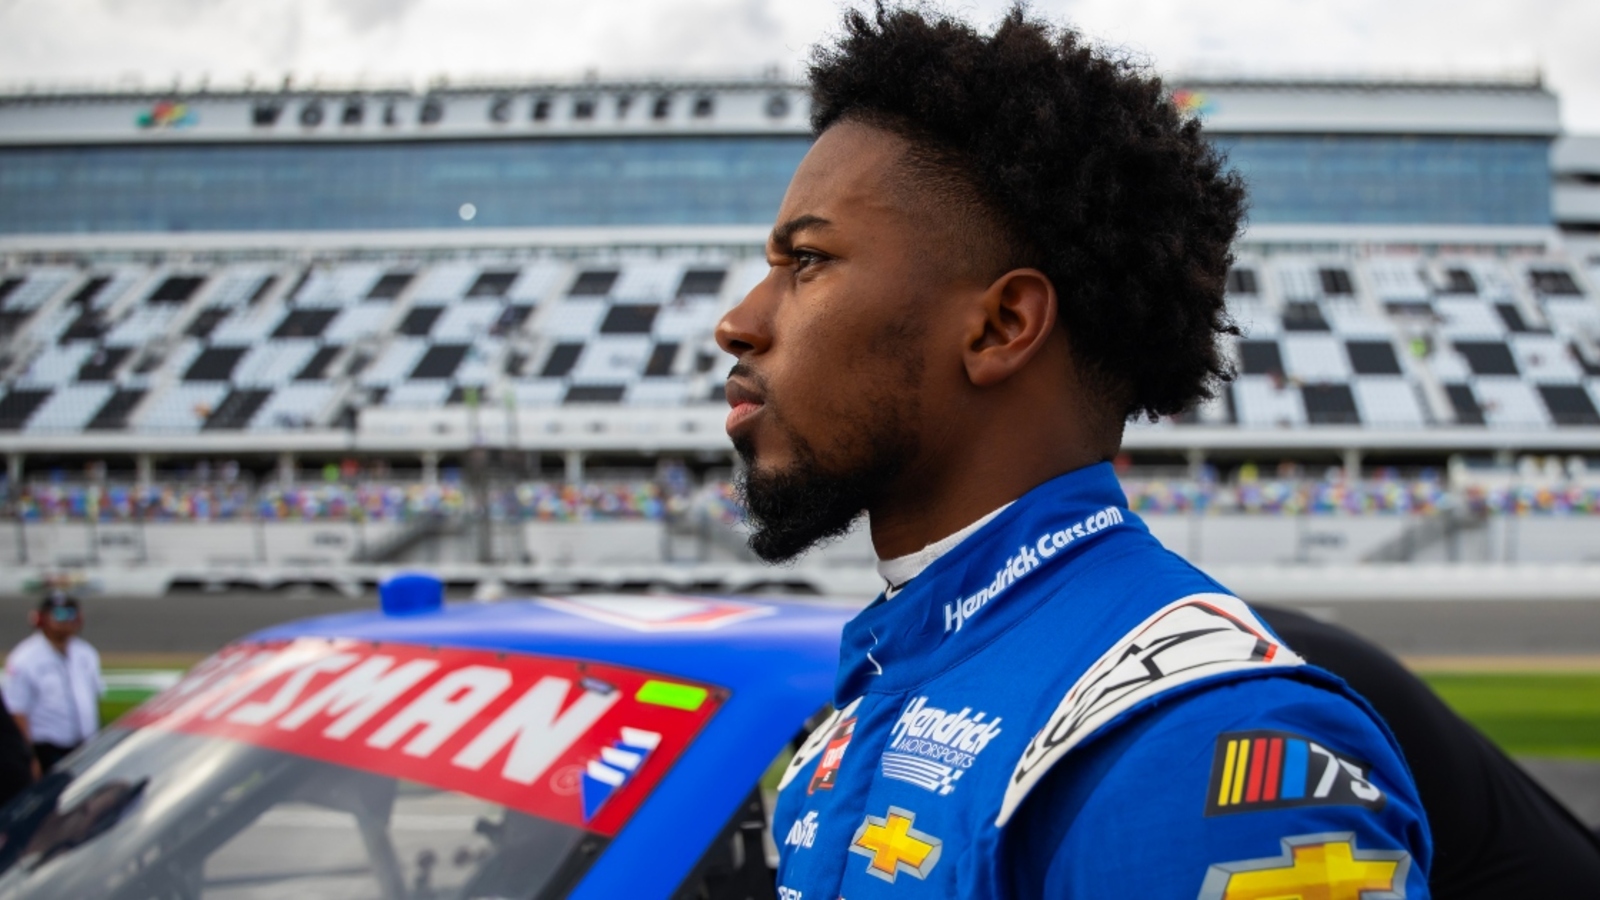 Rajah Caruth dismisses Bubba Wallace controversy from Daytona: ‘It wasn’t anything serious’